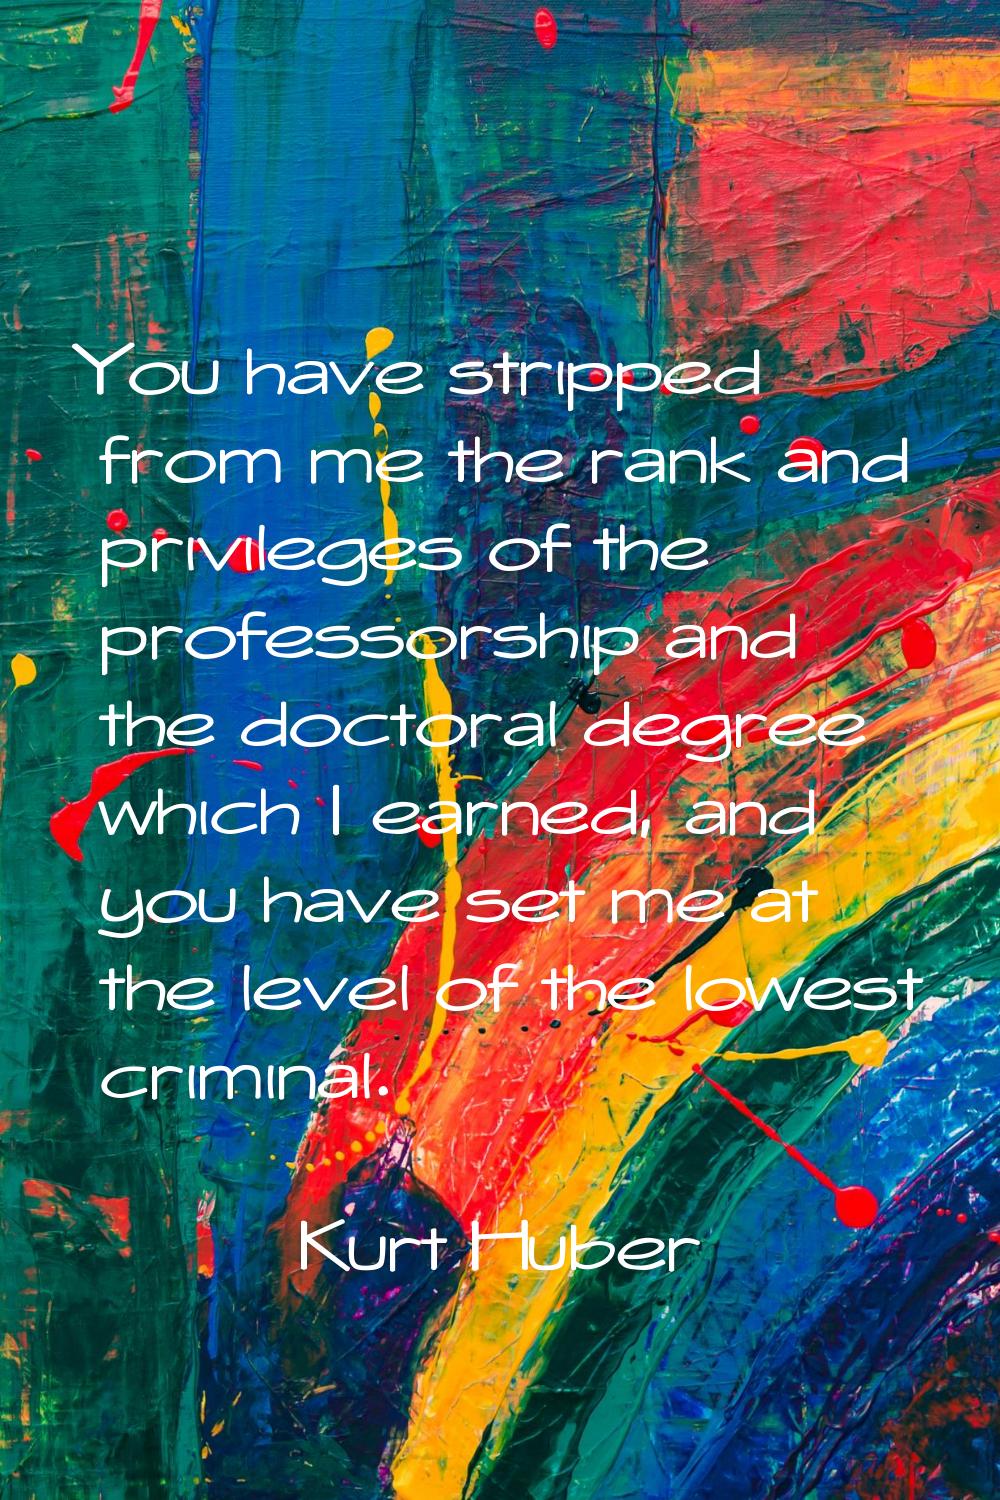 You have stripped from me the rank and privileges of the professorship and the doctoral degree whic